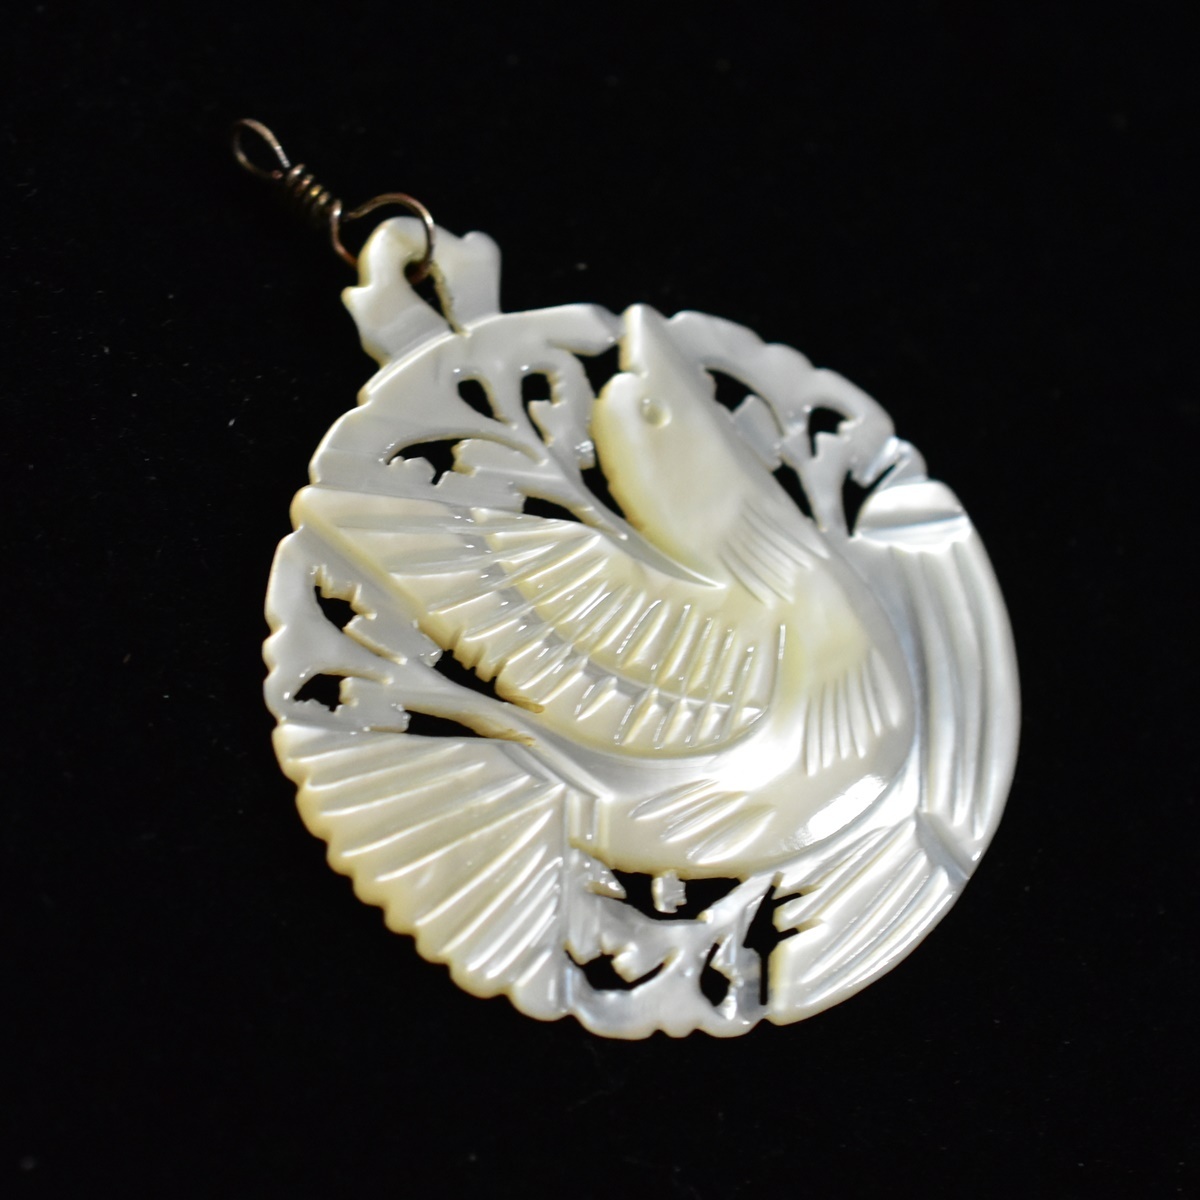  antique betsure Hem pearl White Butterfly ./ mother ob pearl /... small bird. pendant top / charm genuine article guarantee 